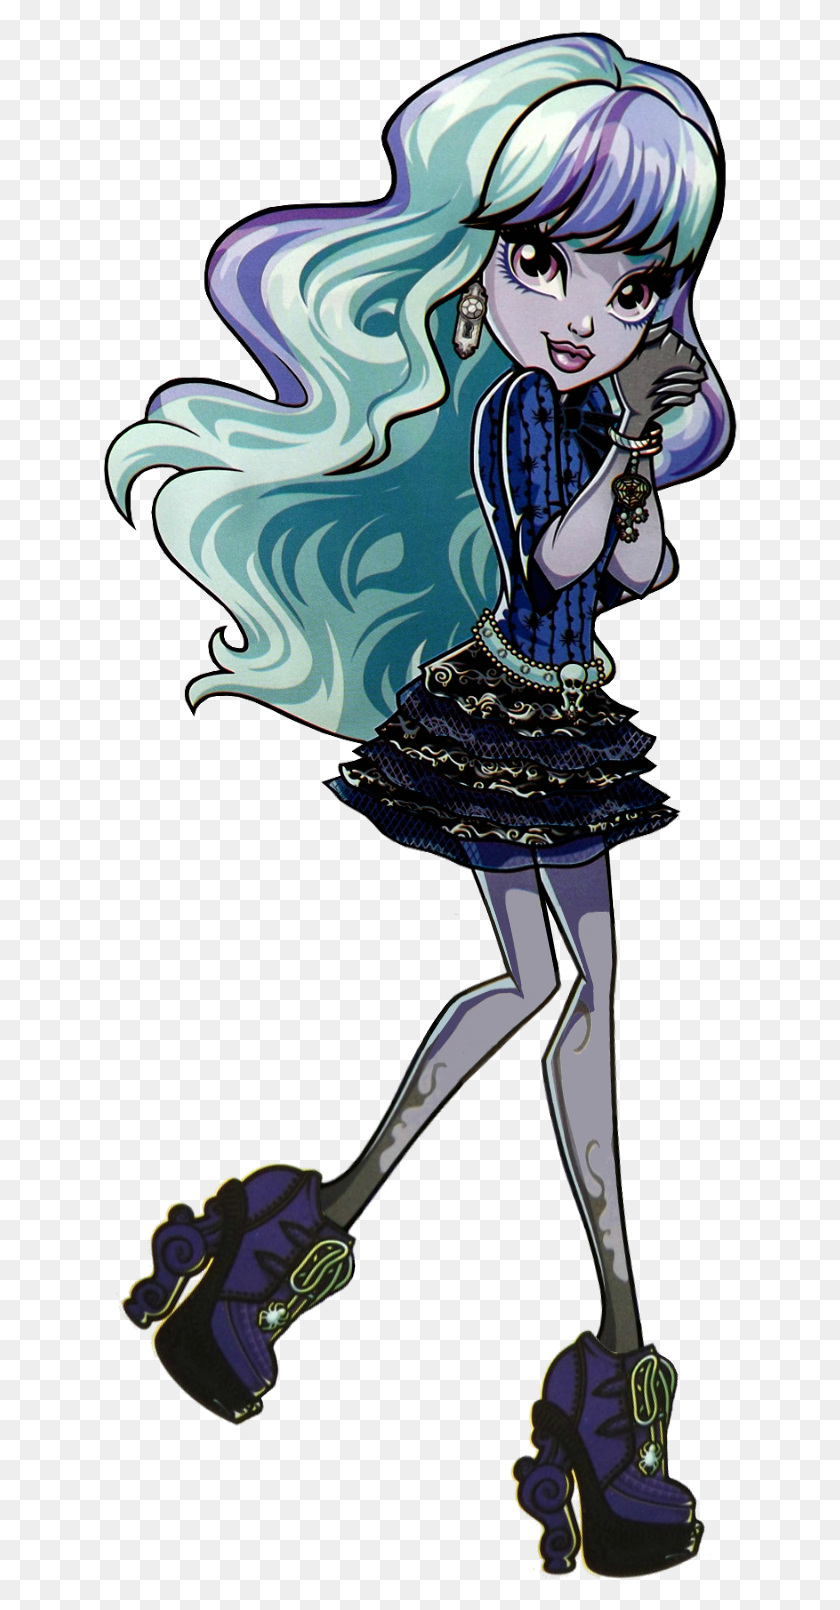 635x1550 Descargar Png / Monster High Monsters And Filing More, Persona, Humano, Ropa Hd Png